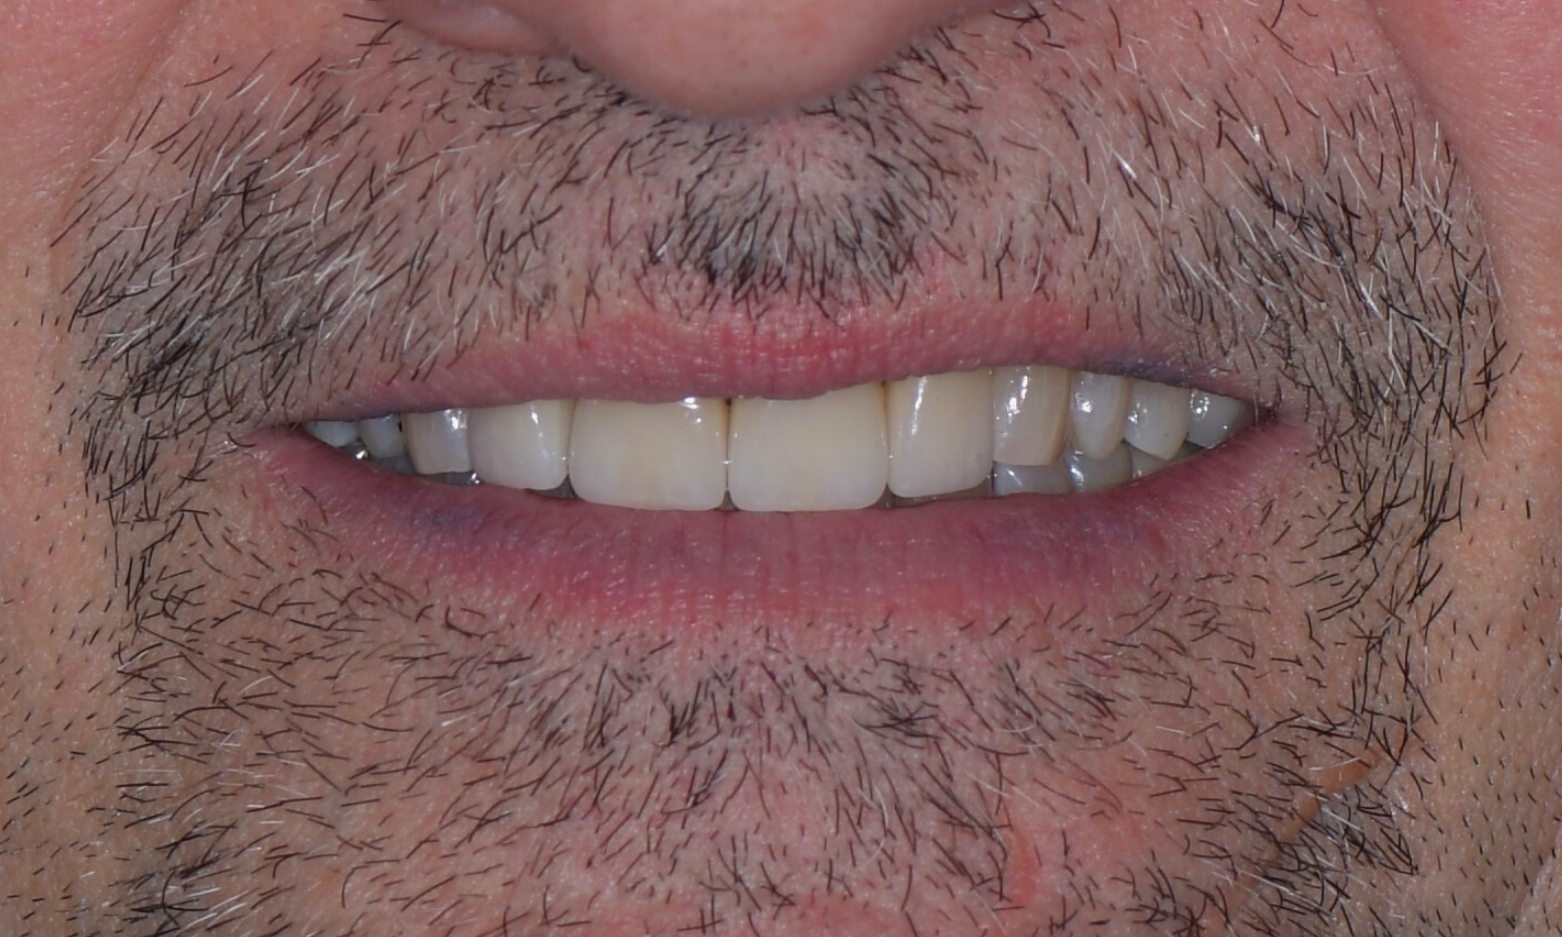 Eckland Family Dentistry - Replacement of Dental Crowns - After